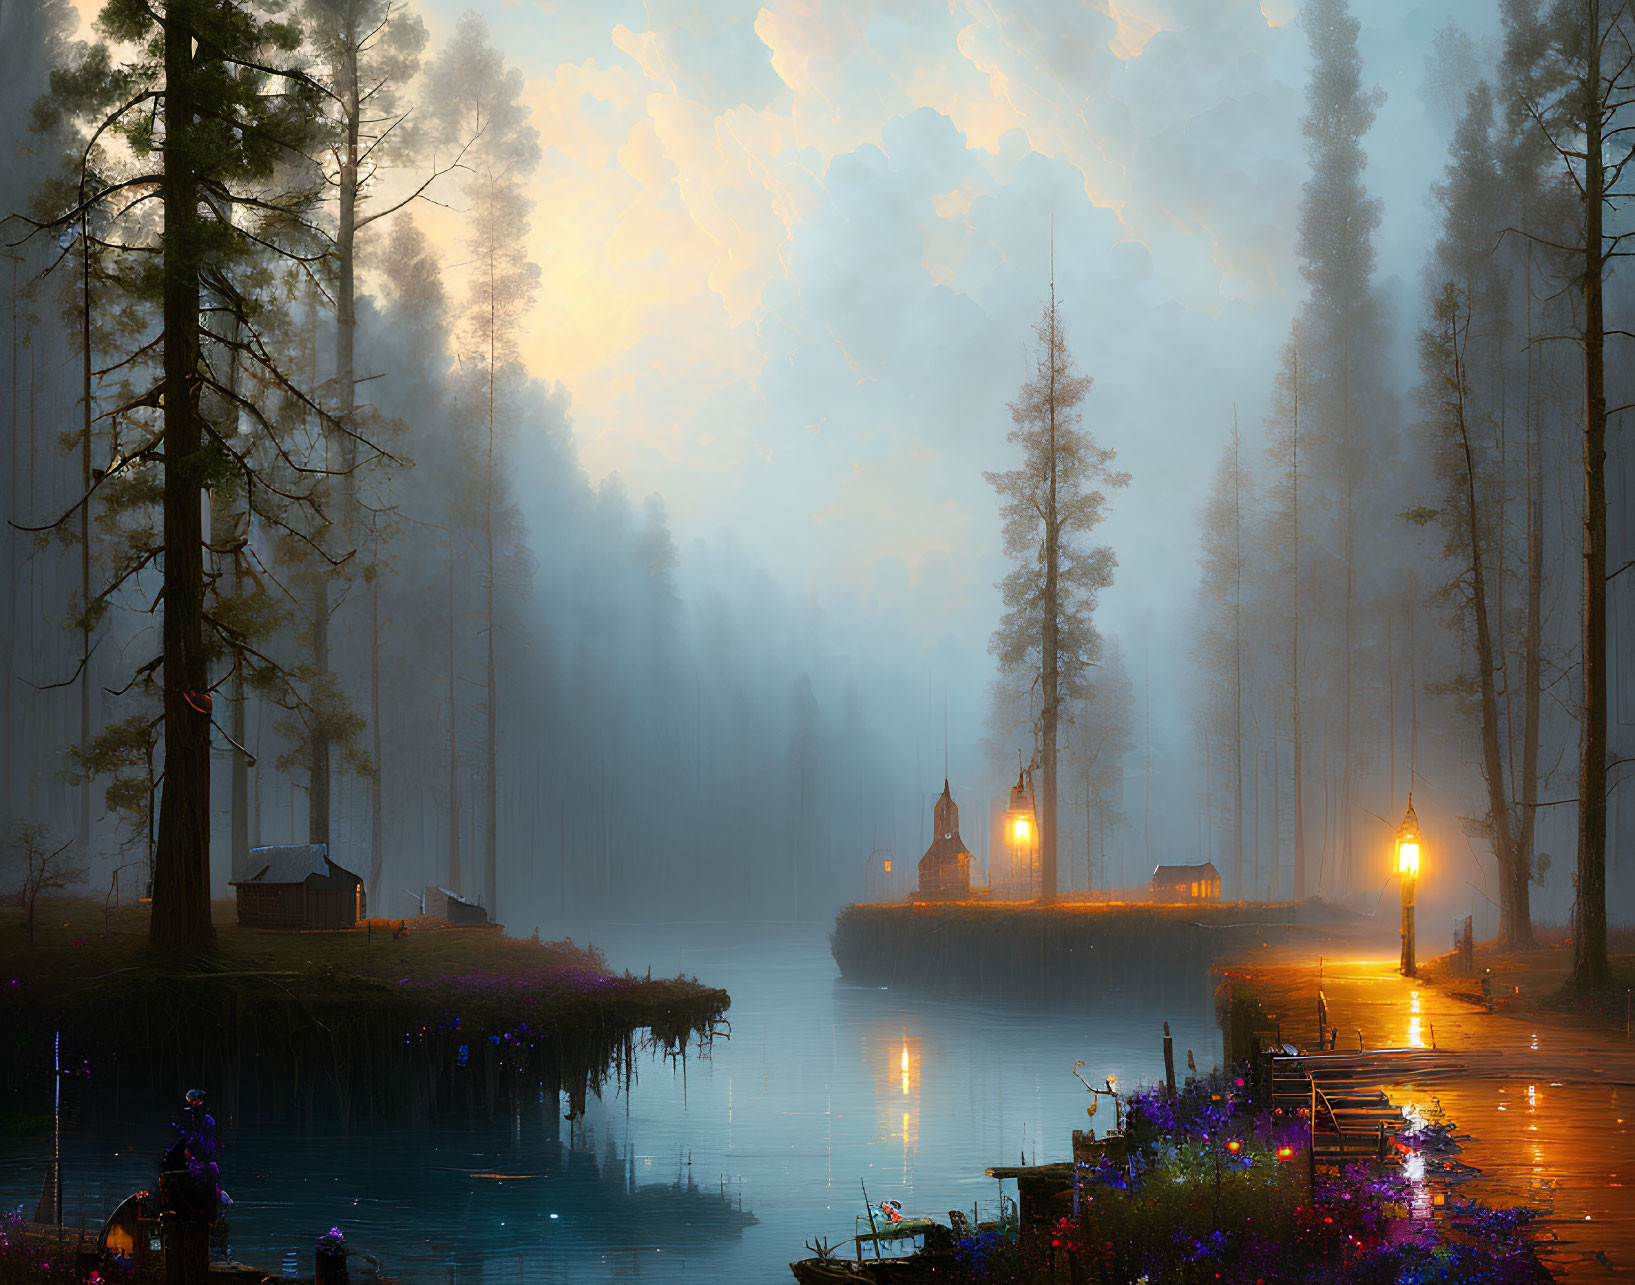 Tranquil lakeside evening with lanterns, chapel, dock, cabin, misty woods,